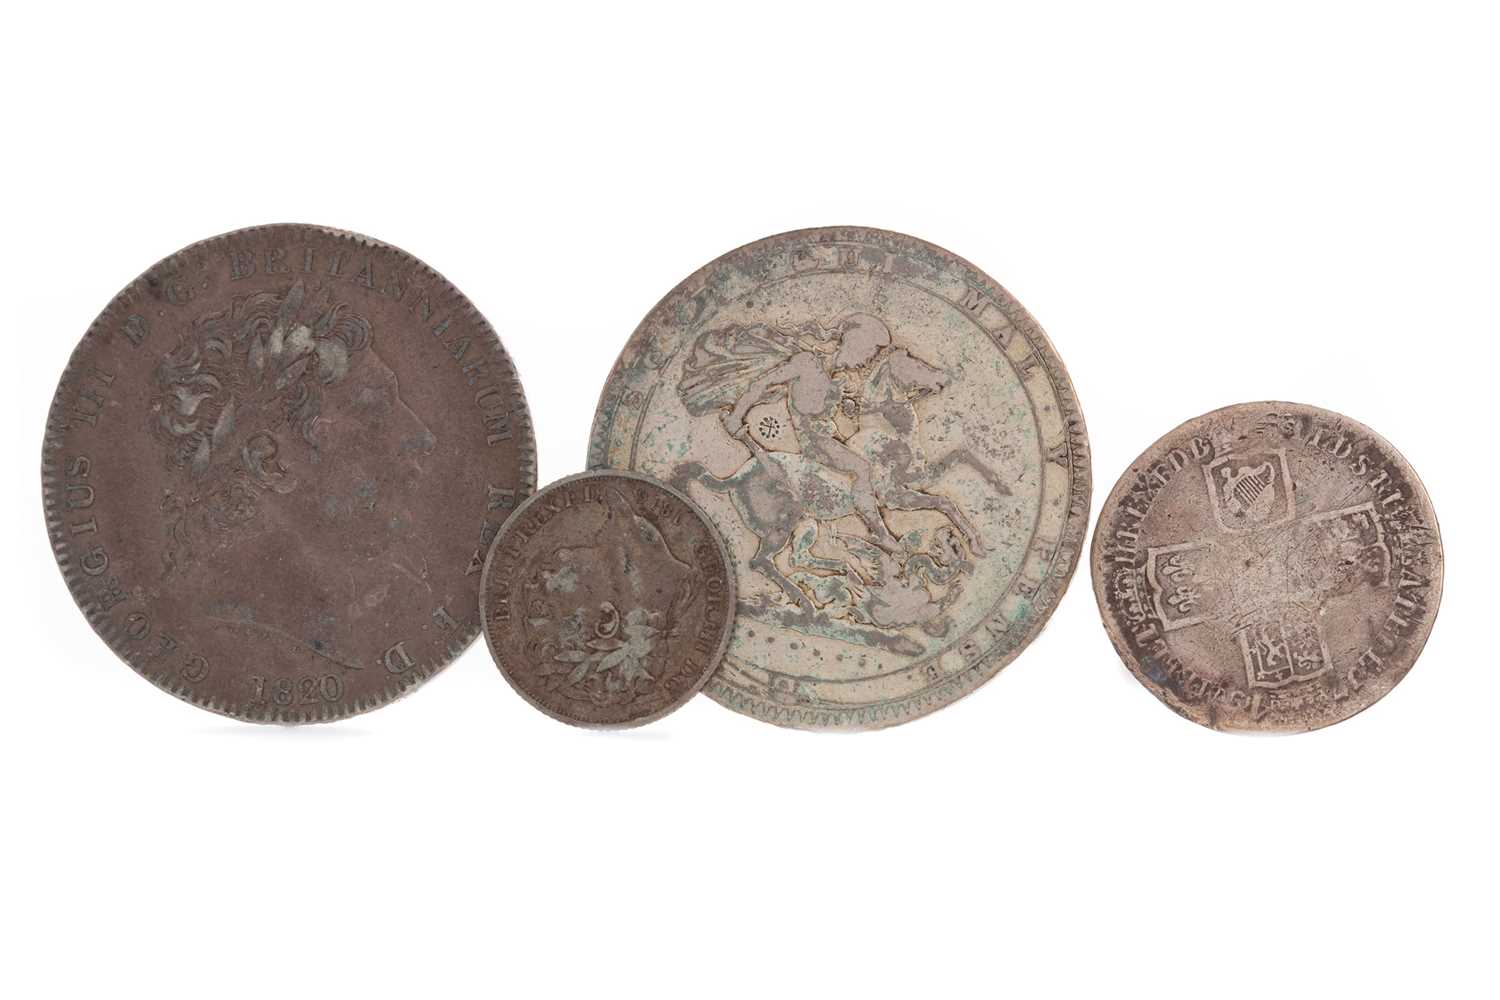 Lot 32 - A COLLECTION OF GEORGE II (1727 - 1760) AND GEORGE III (1760 - 1820) COINS